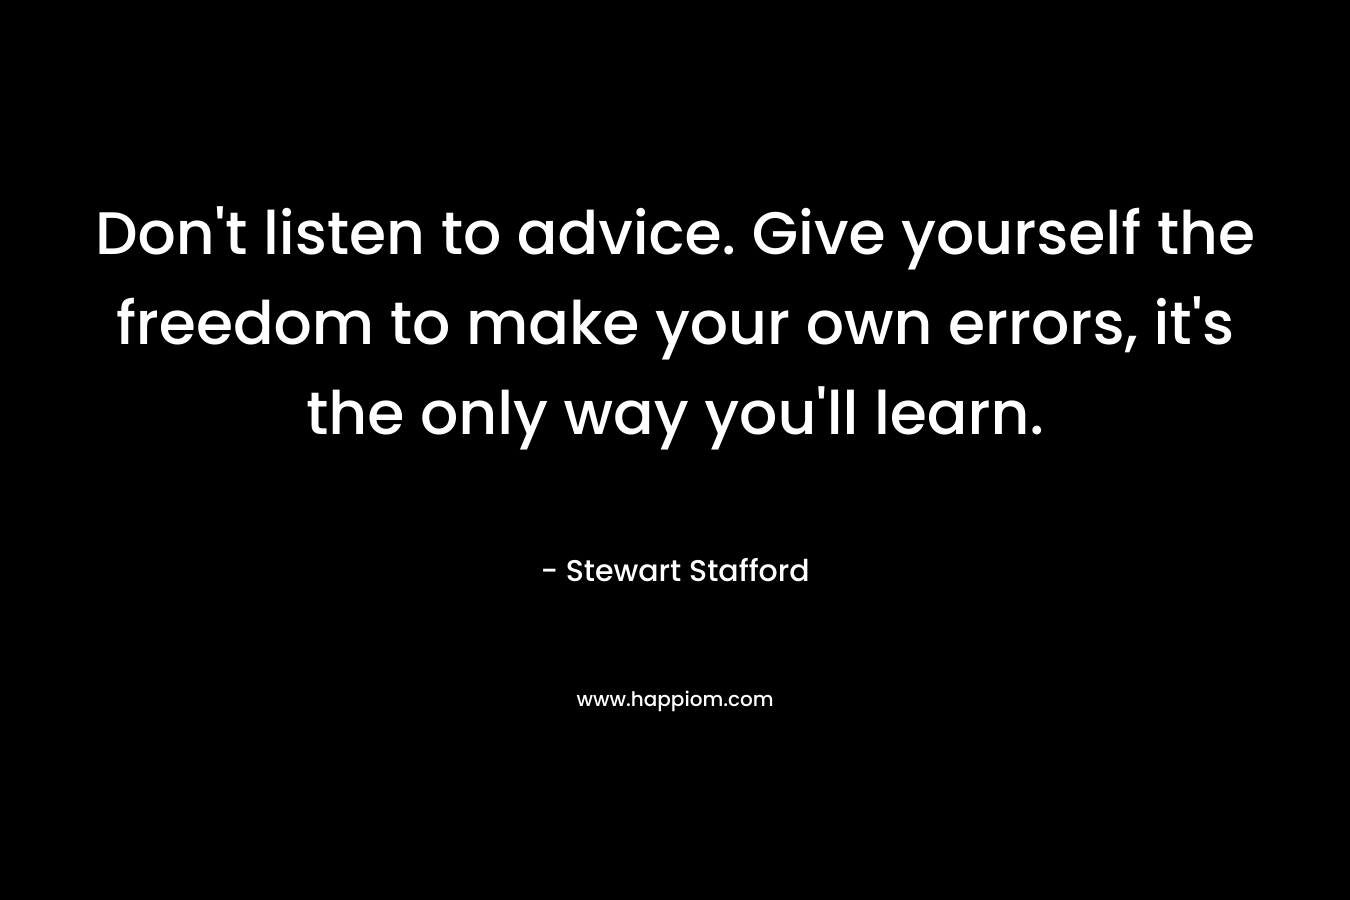 Don’t listen to advice. Give yourself the freedom to make your own errors, it’s the only way you’ll learn. – Stewart Stafford